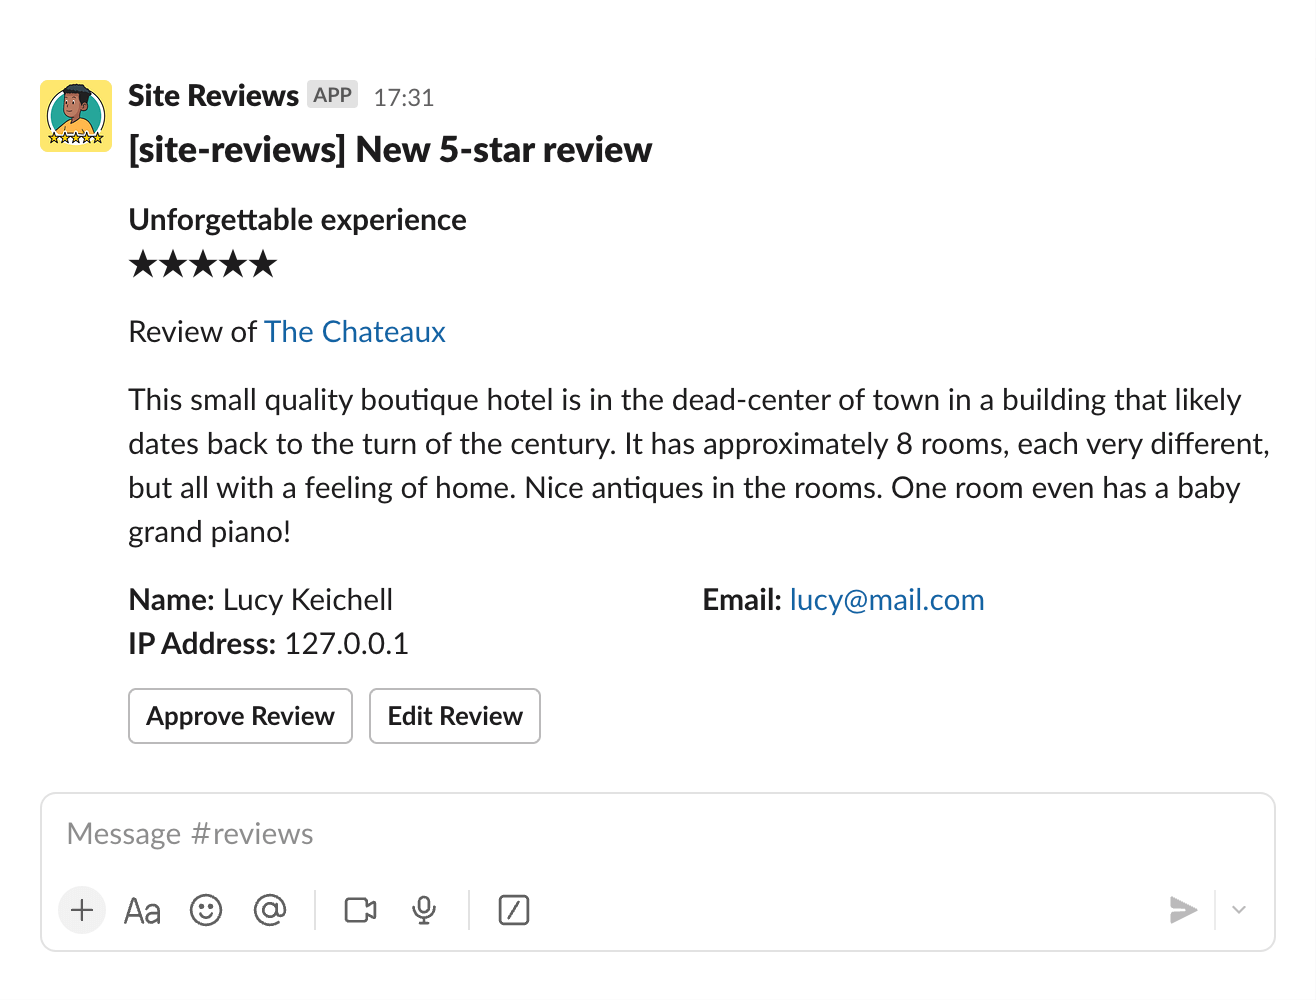 Settings for displaying reviews.